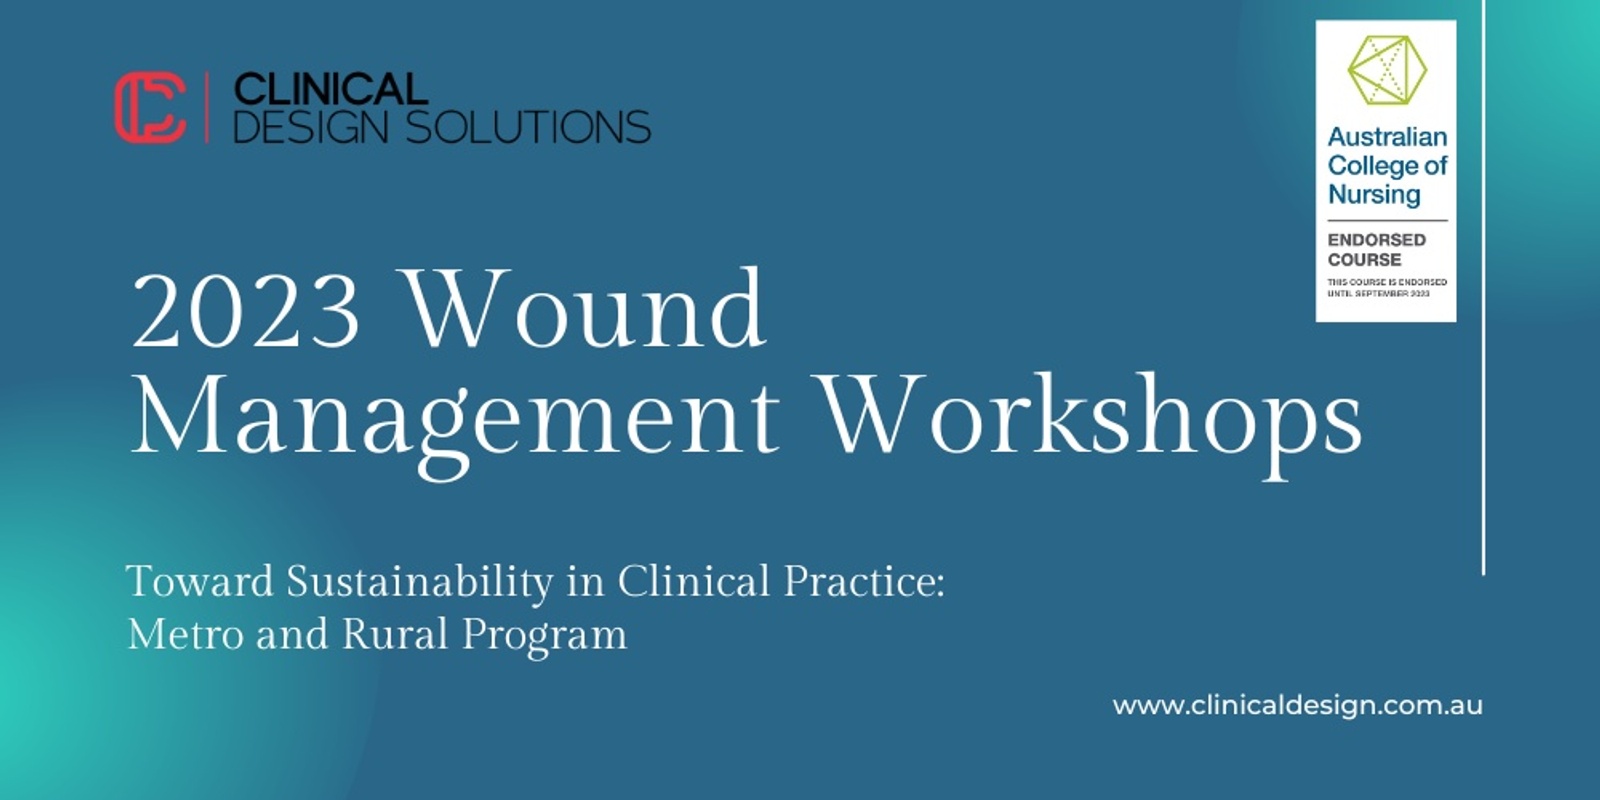 Banner image for Busselton Wound Management Workshop 2023: Change of Date to 13th May 2023